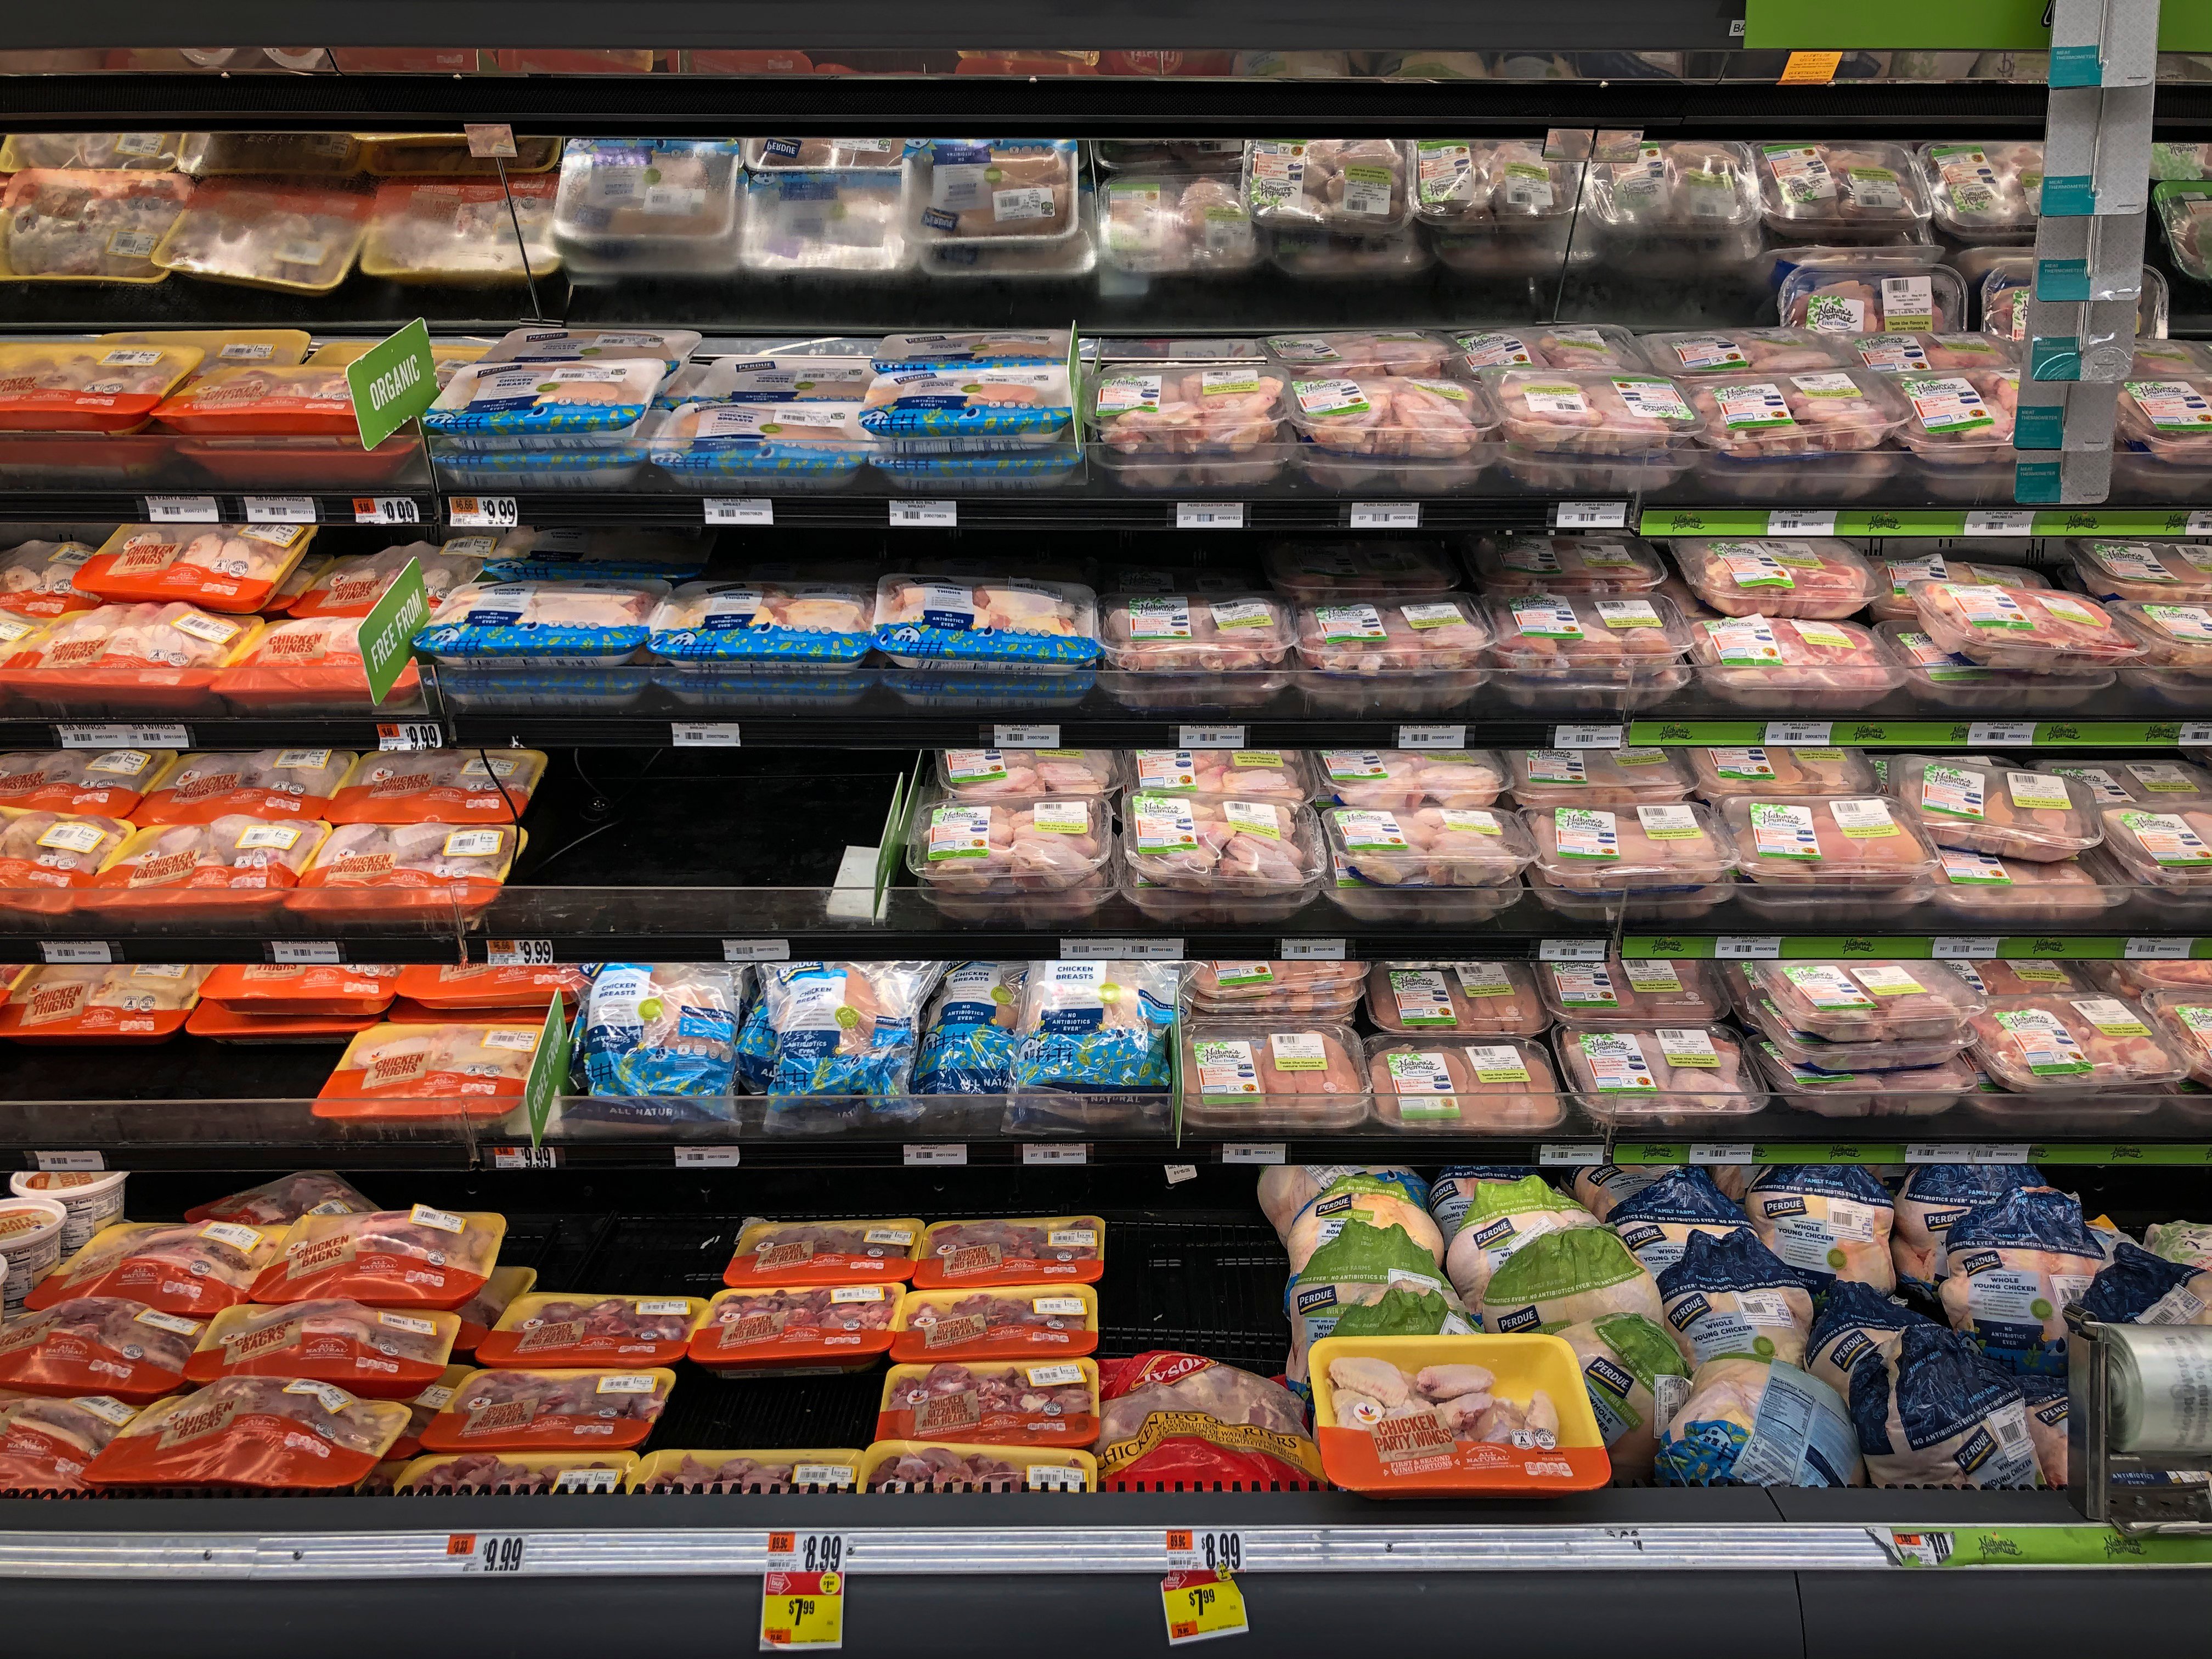 Rows of meat in a cold case at a grocery store.